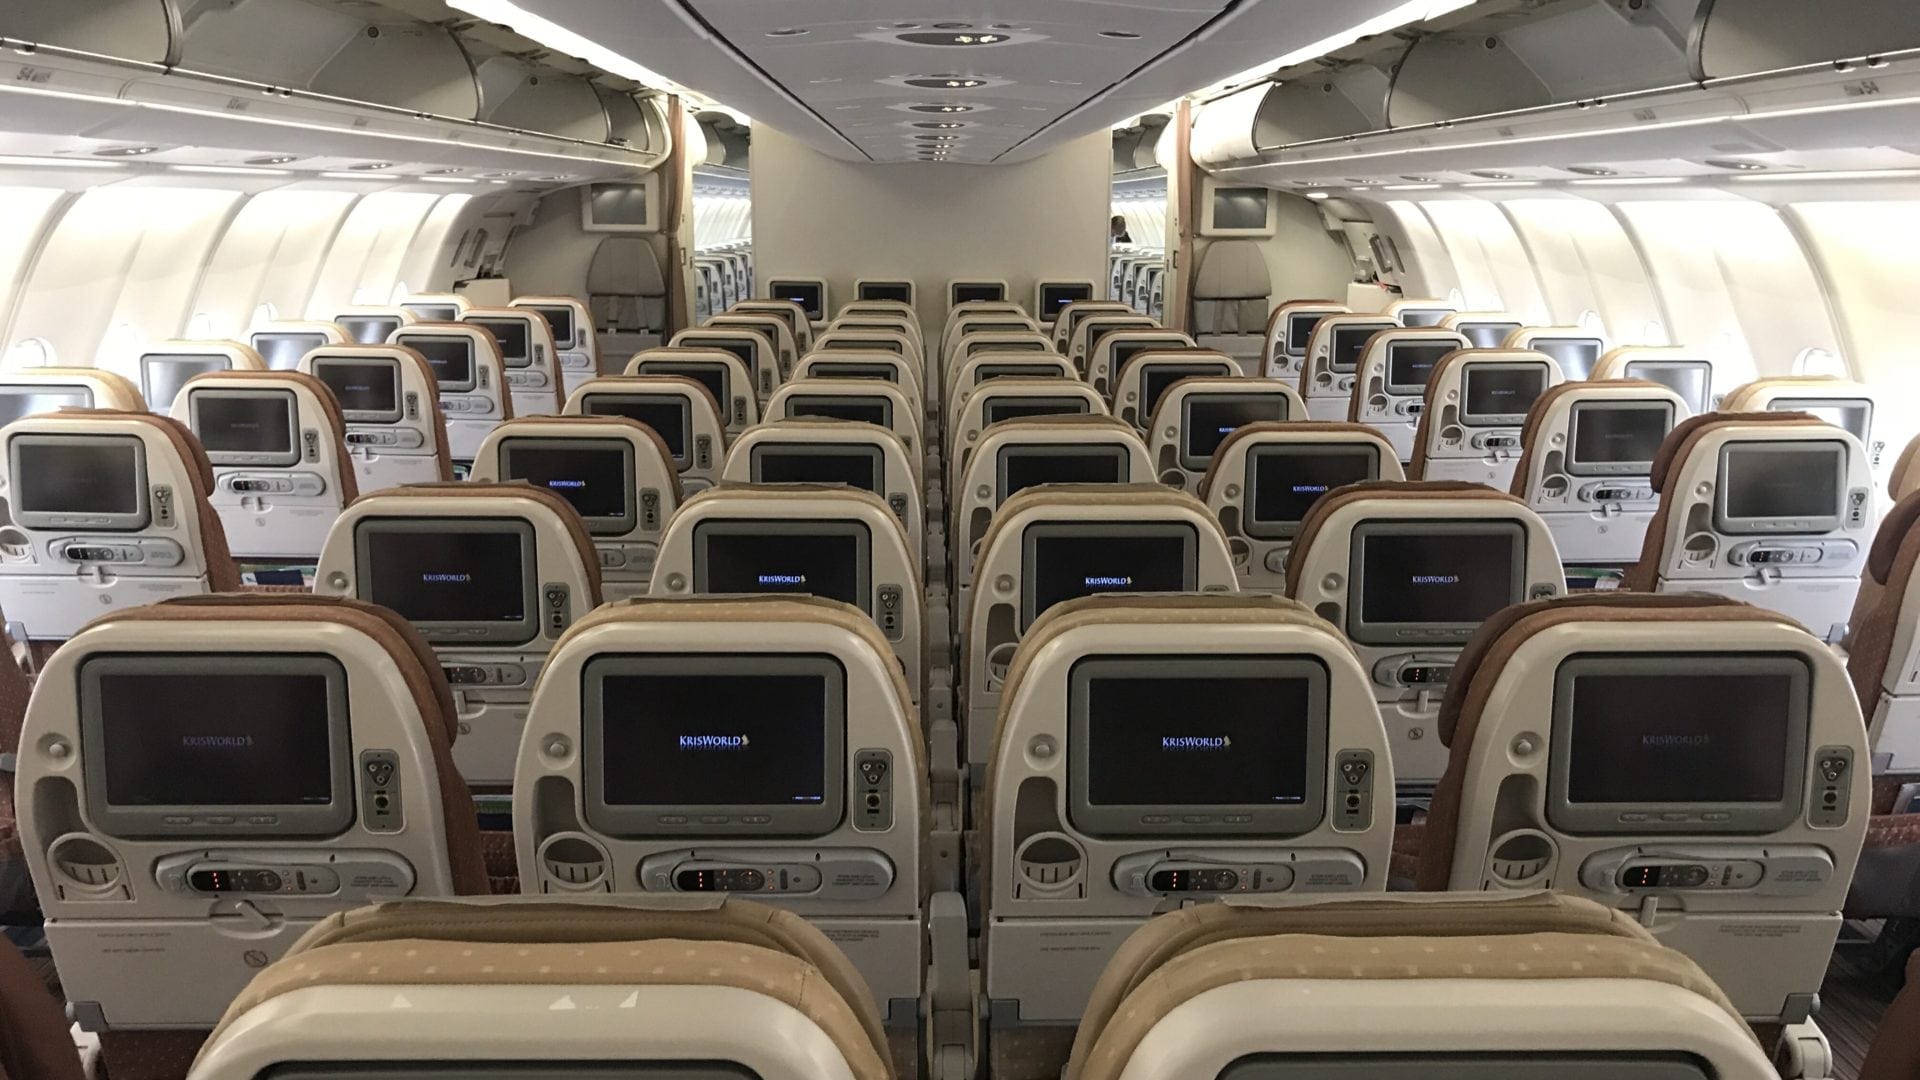 Singapore Airlines Economy Class Airbus A330 Kabine 4